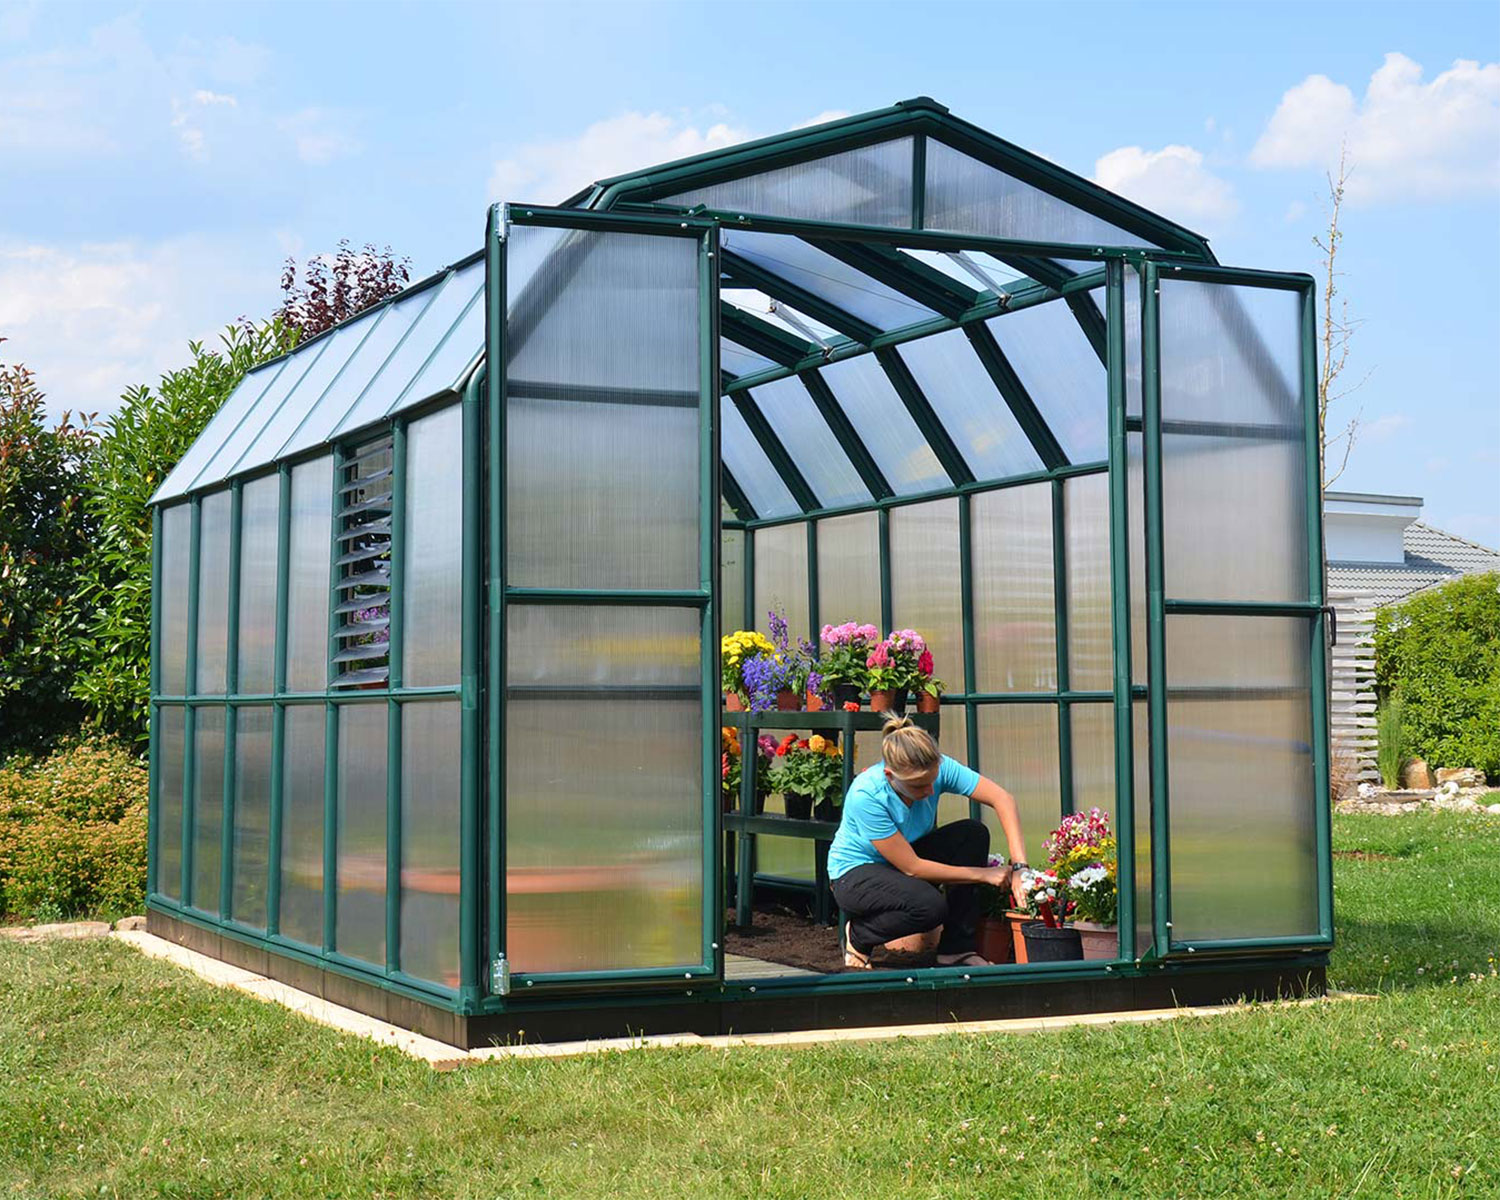 Greenhouse Prestige 8 ft. x 12 ft. Green Structure & Twin Wall Panels gardening